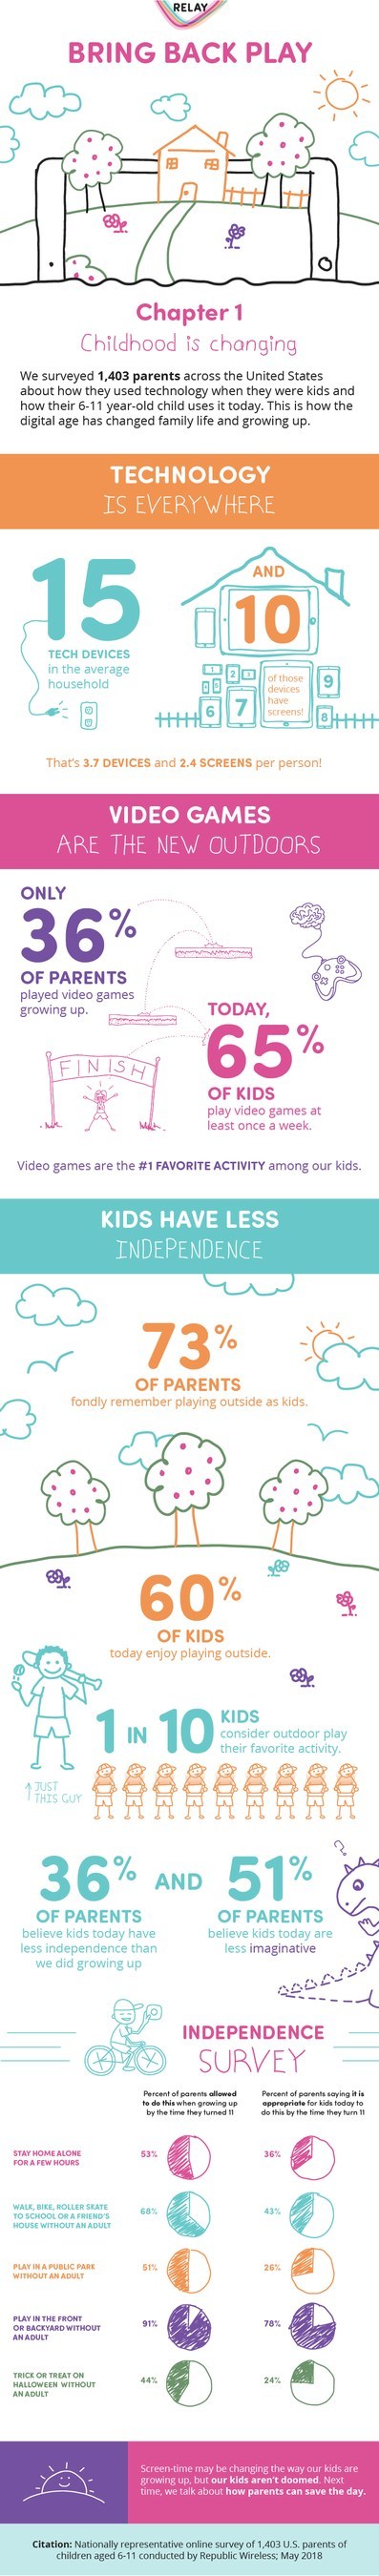 Changing Childhood: “Bring Back Play” Study From Relay Shows Family Life is Suffering from Screen Overload